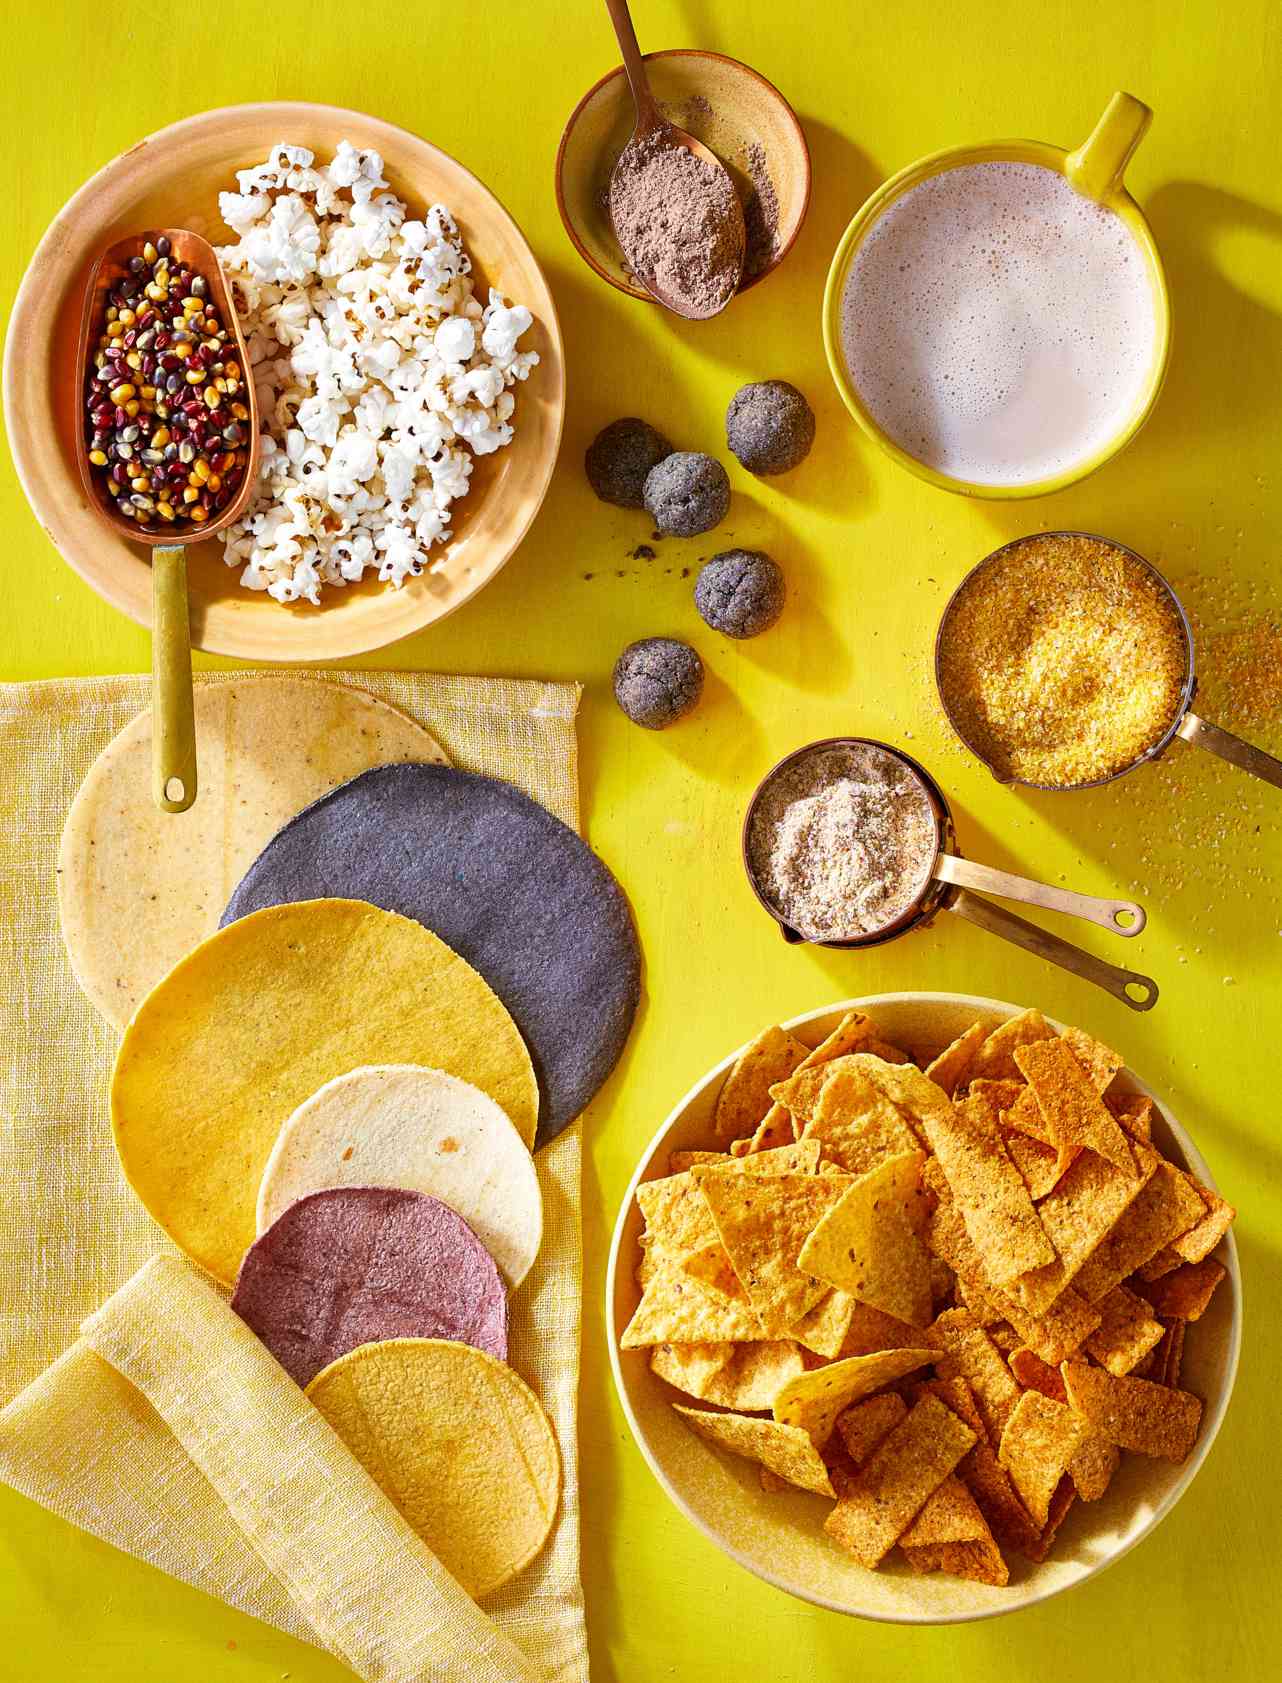 Assortment of corn products like flour, tortillas, chips and popcorn in bowls on yellow background.